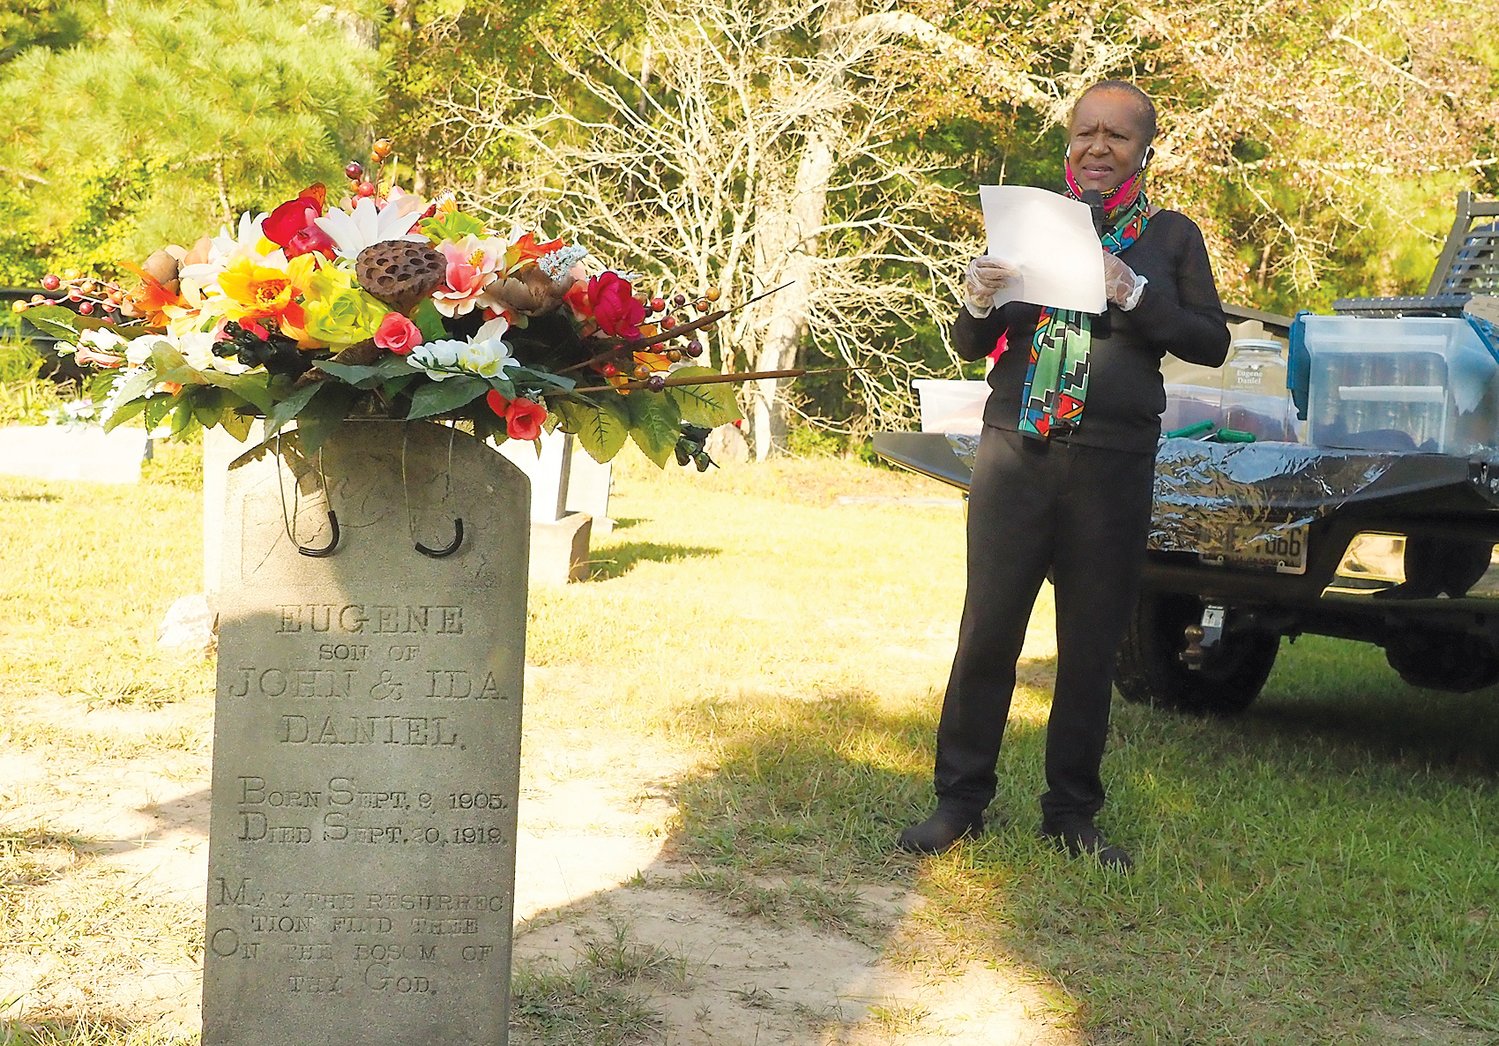 With Eugene Daniel's tombstone nearby, Mary Nettles opened the remembrance service for him at New Hope Baptist Church's cemetery.